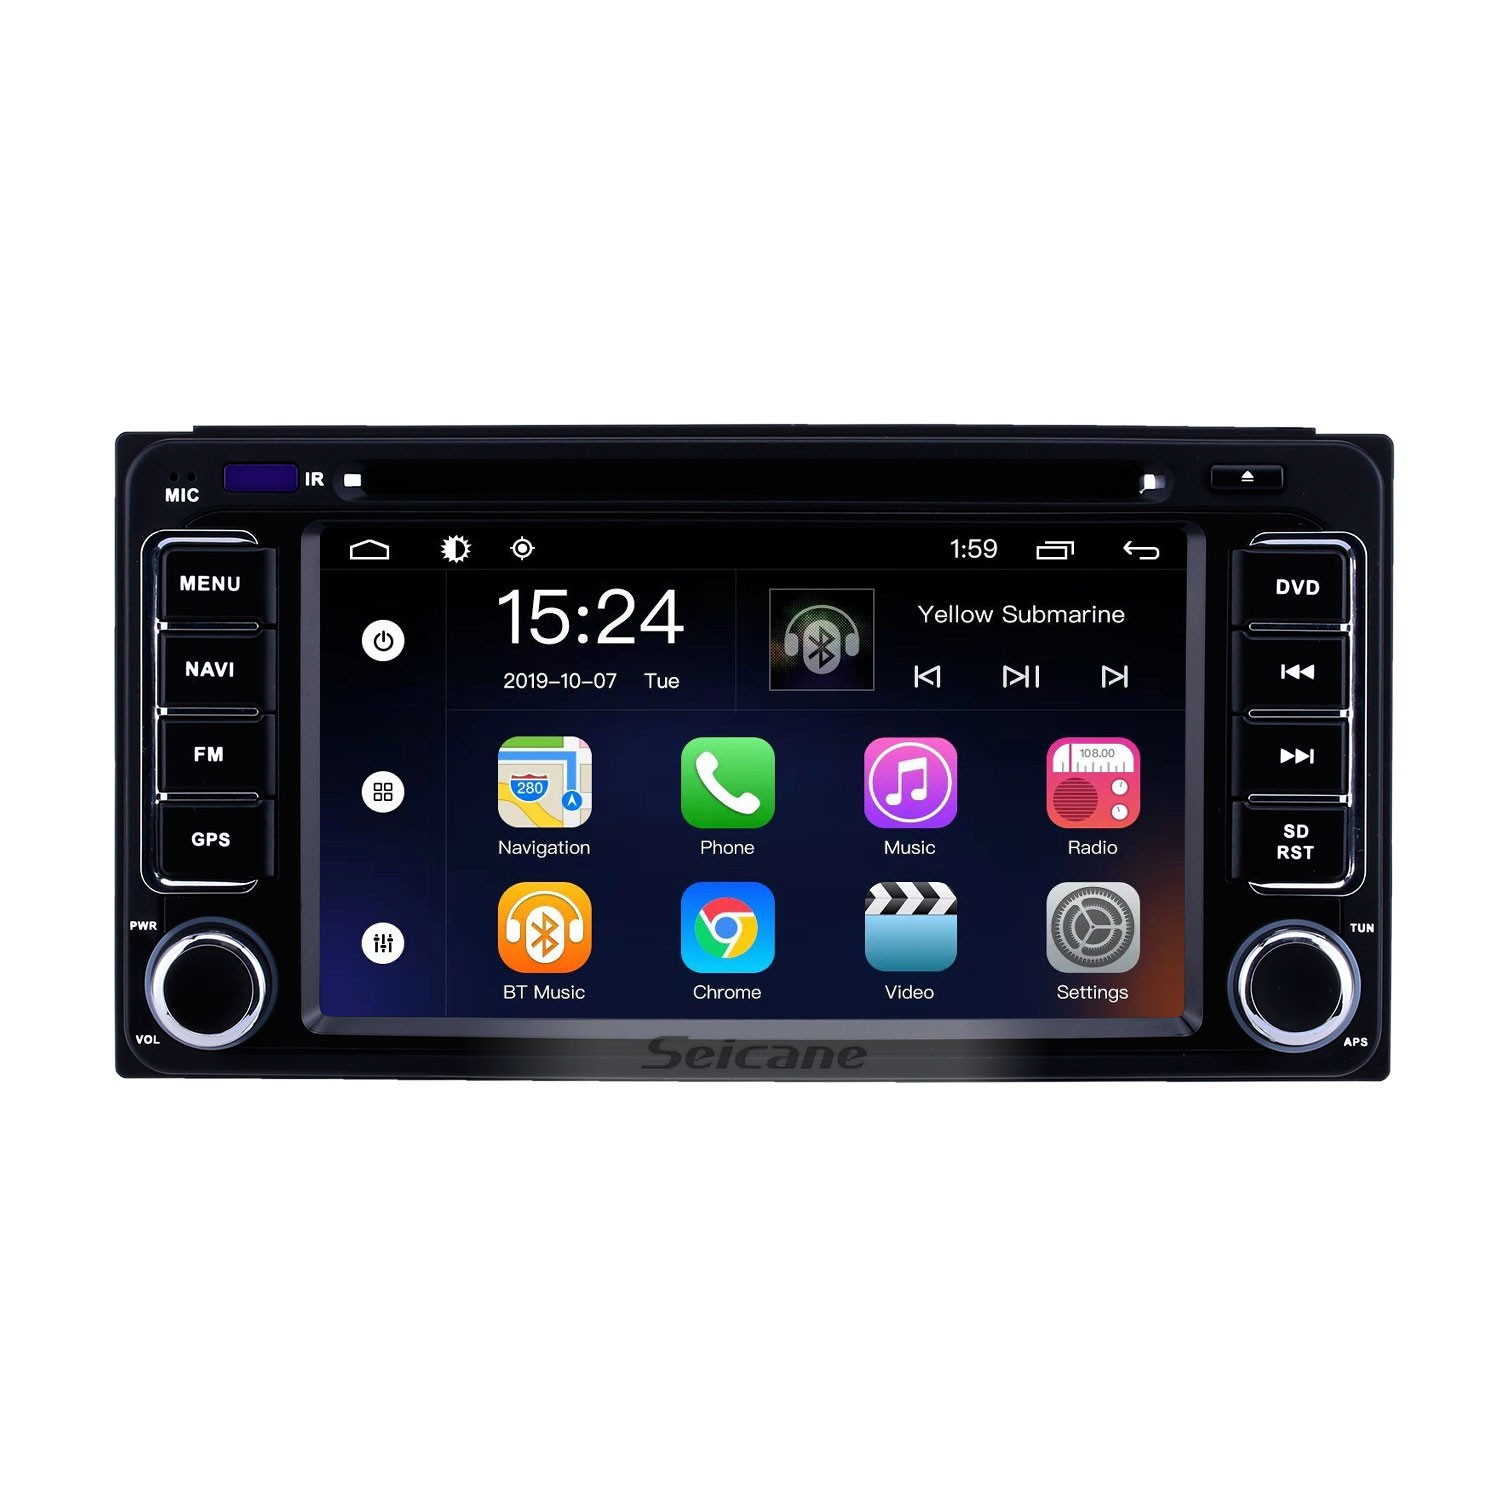 MP5 Bt Stereo Car Speakers MP5 Video DVD Player MP5 Android Auto Car Play  6.2 Inch Smart Screen Autoradio Carplay - China Car GPS Navigation, for  Universal Car Model